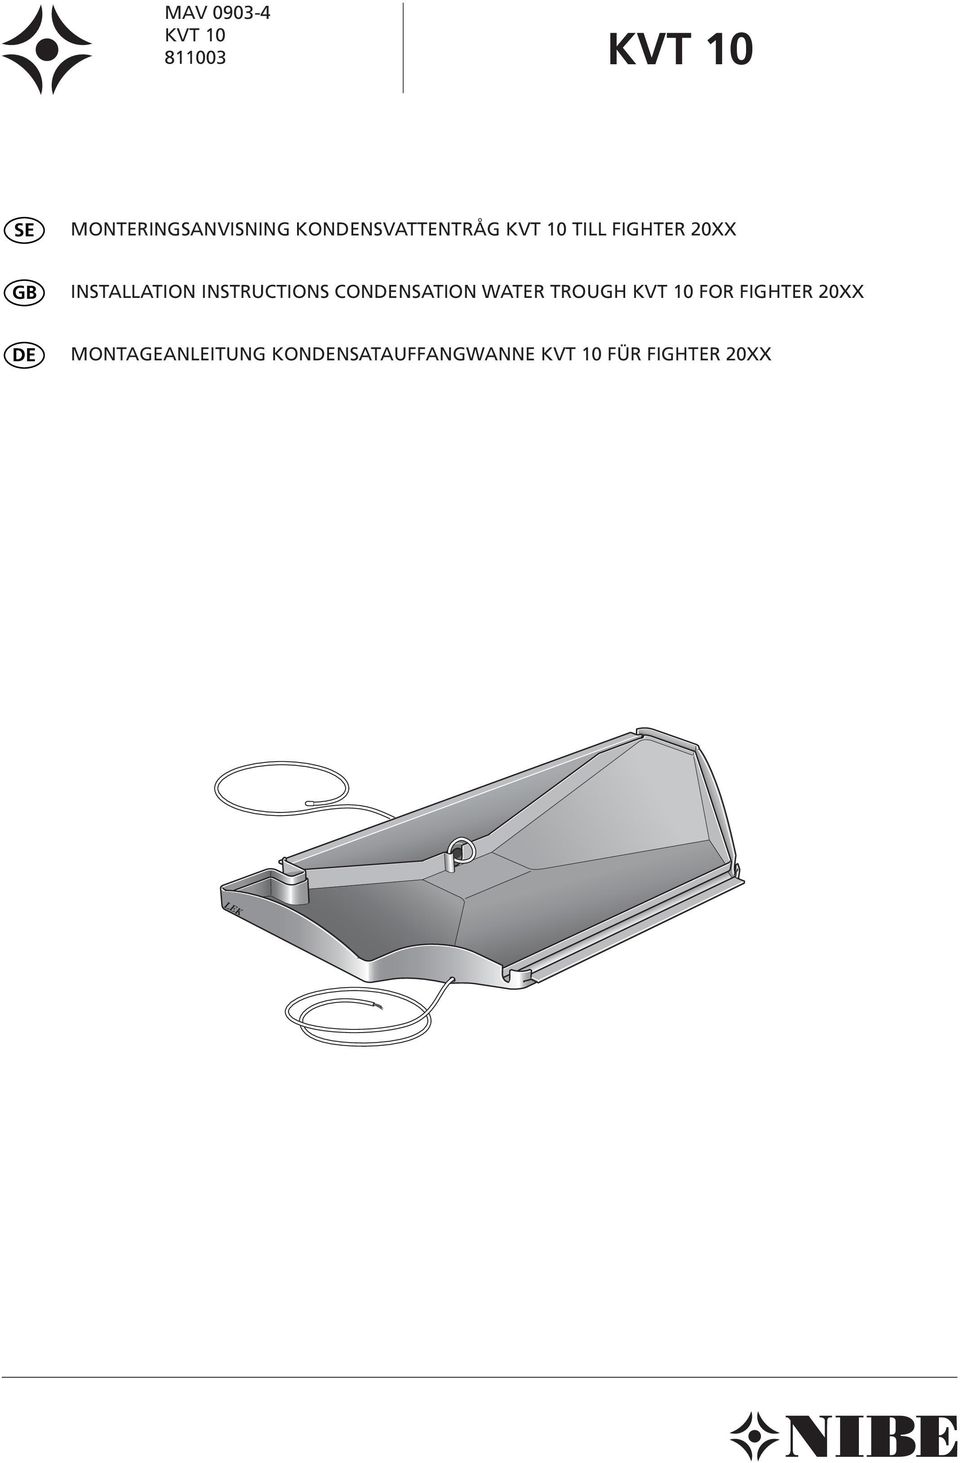 INSTRUCTIONS CONDENSATION WATER TROUGH FOR FIGHTER